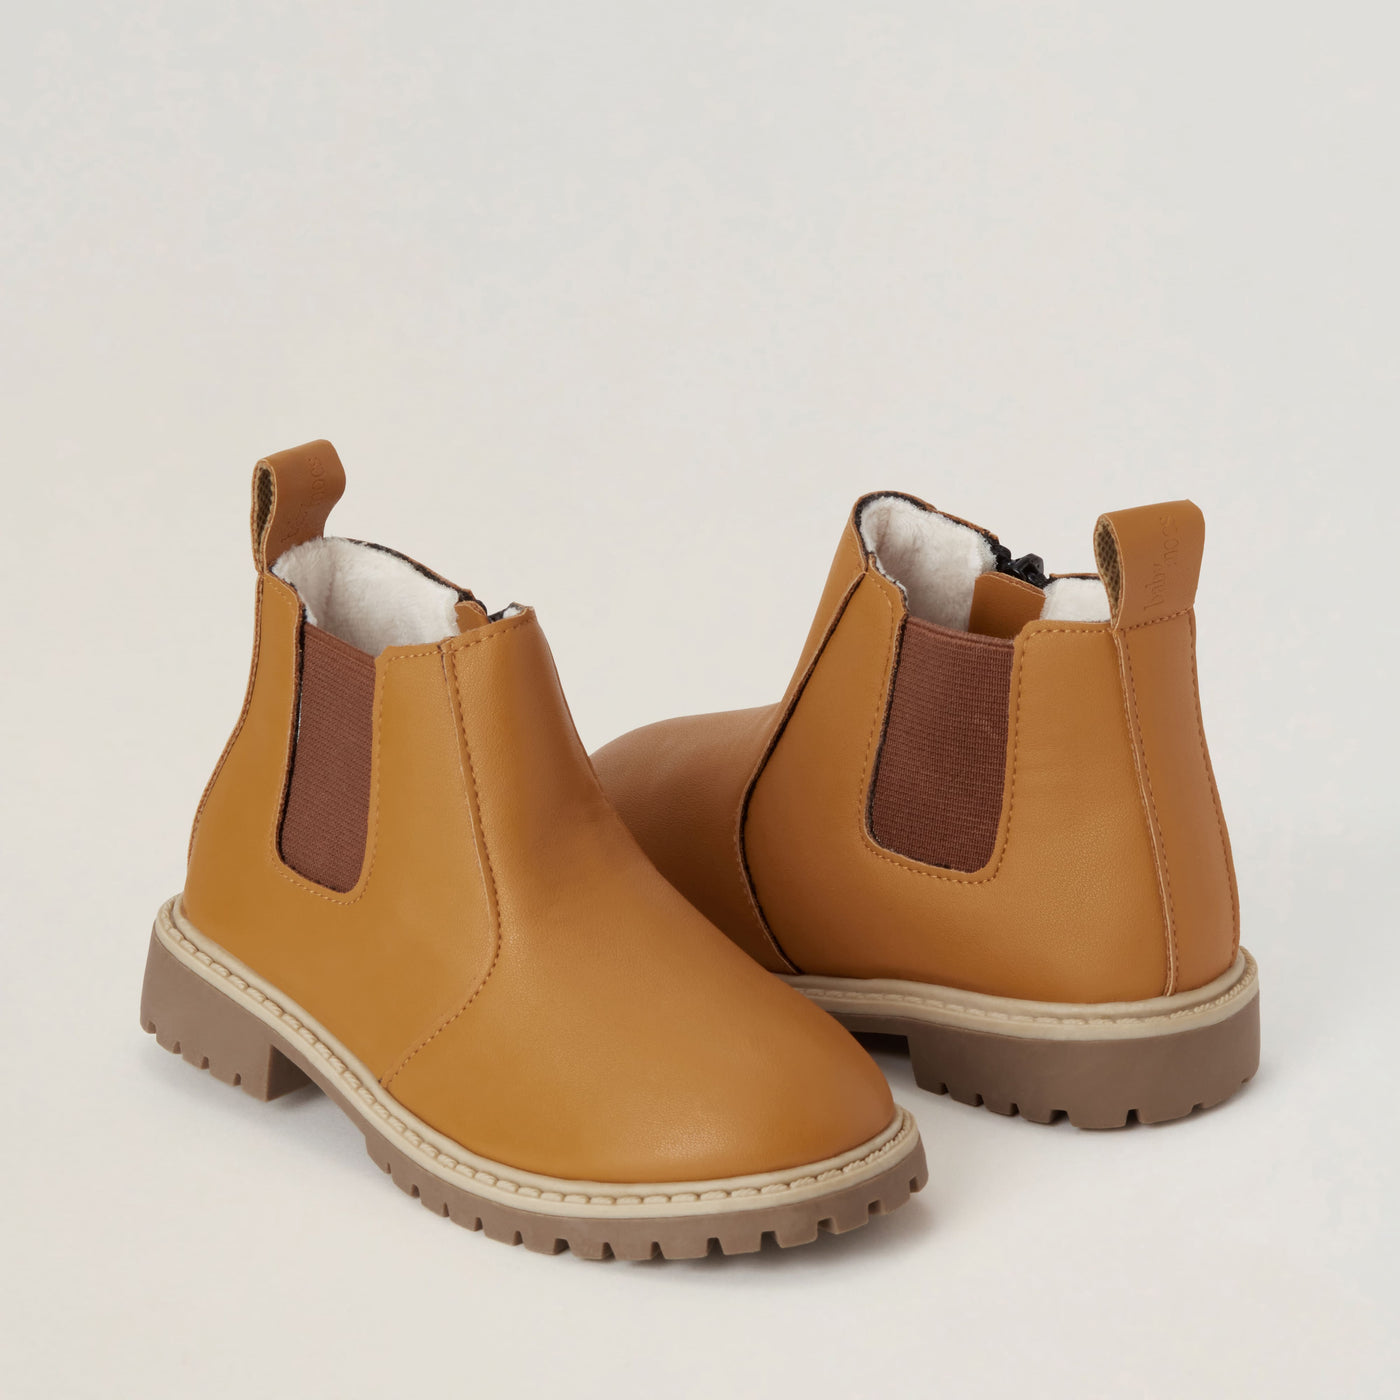 Little Explorer Boots + Free Accessory of your choice!